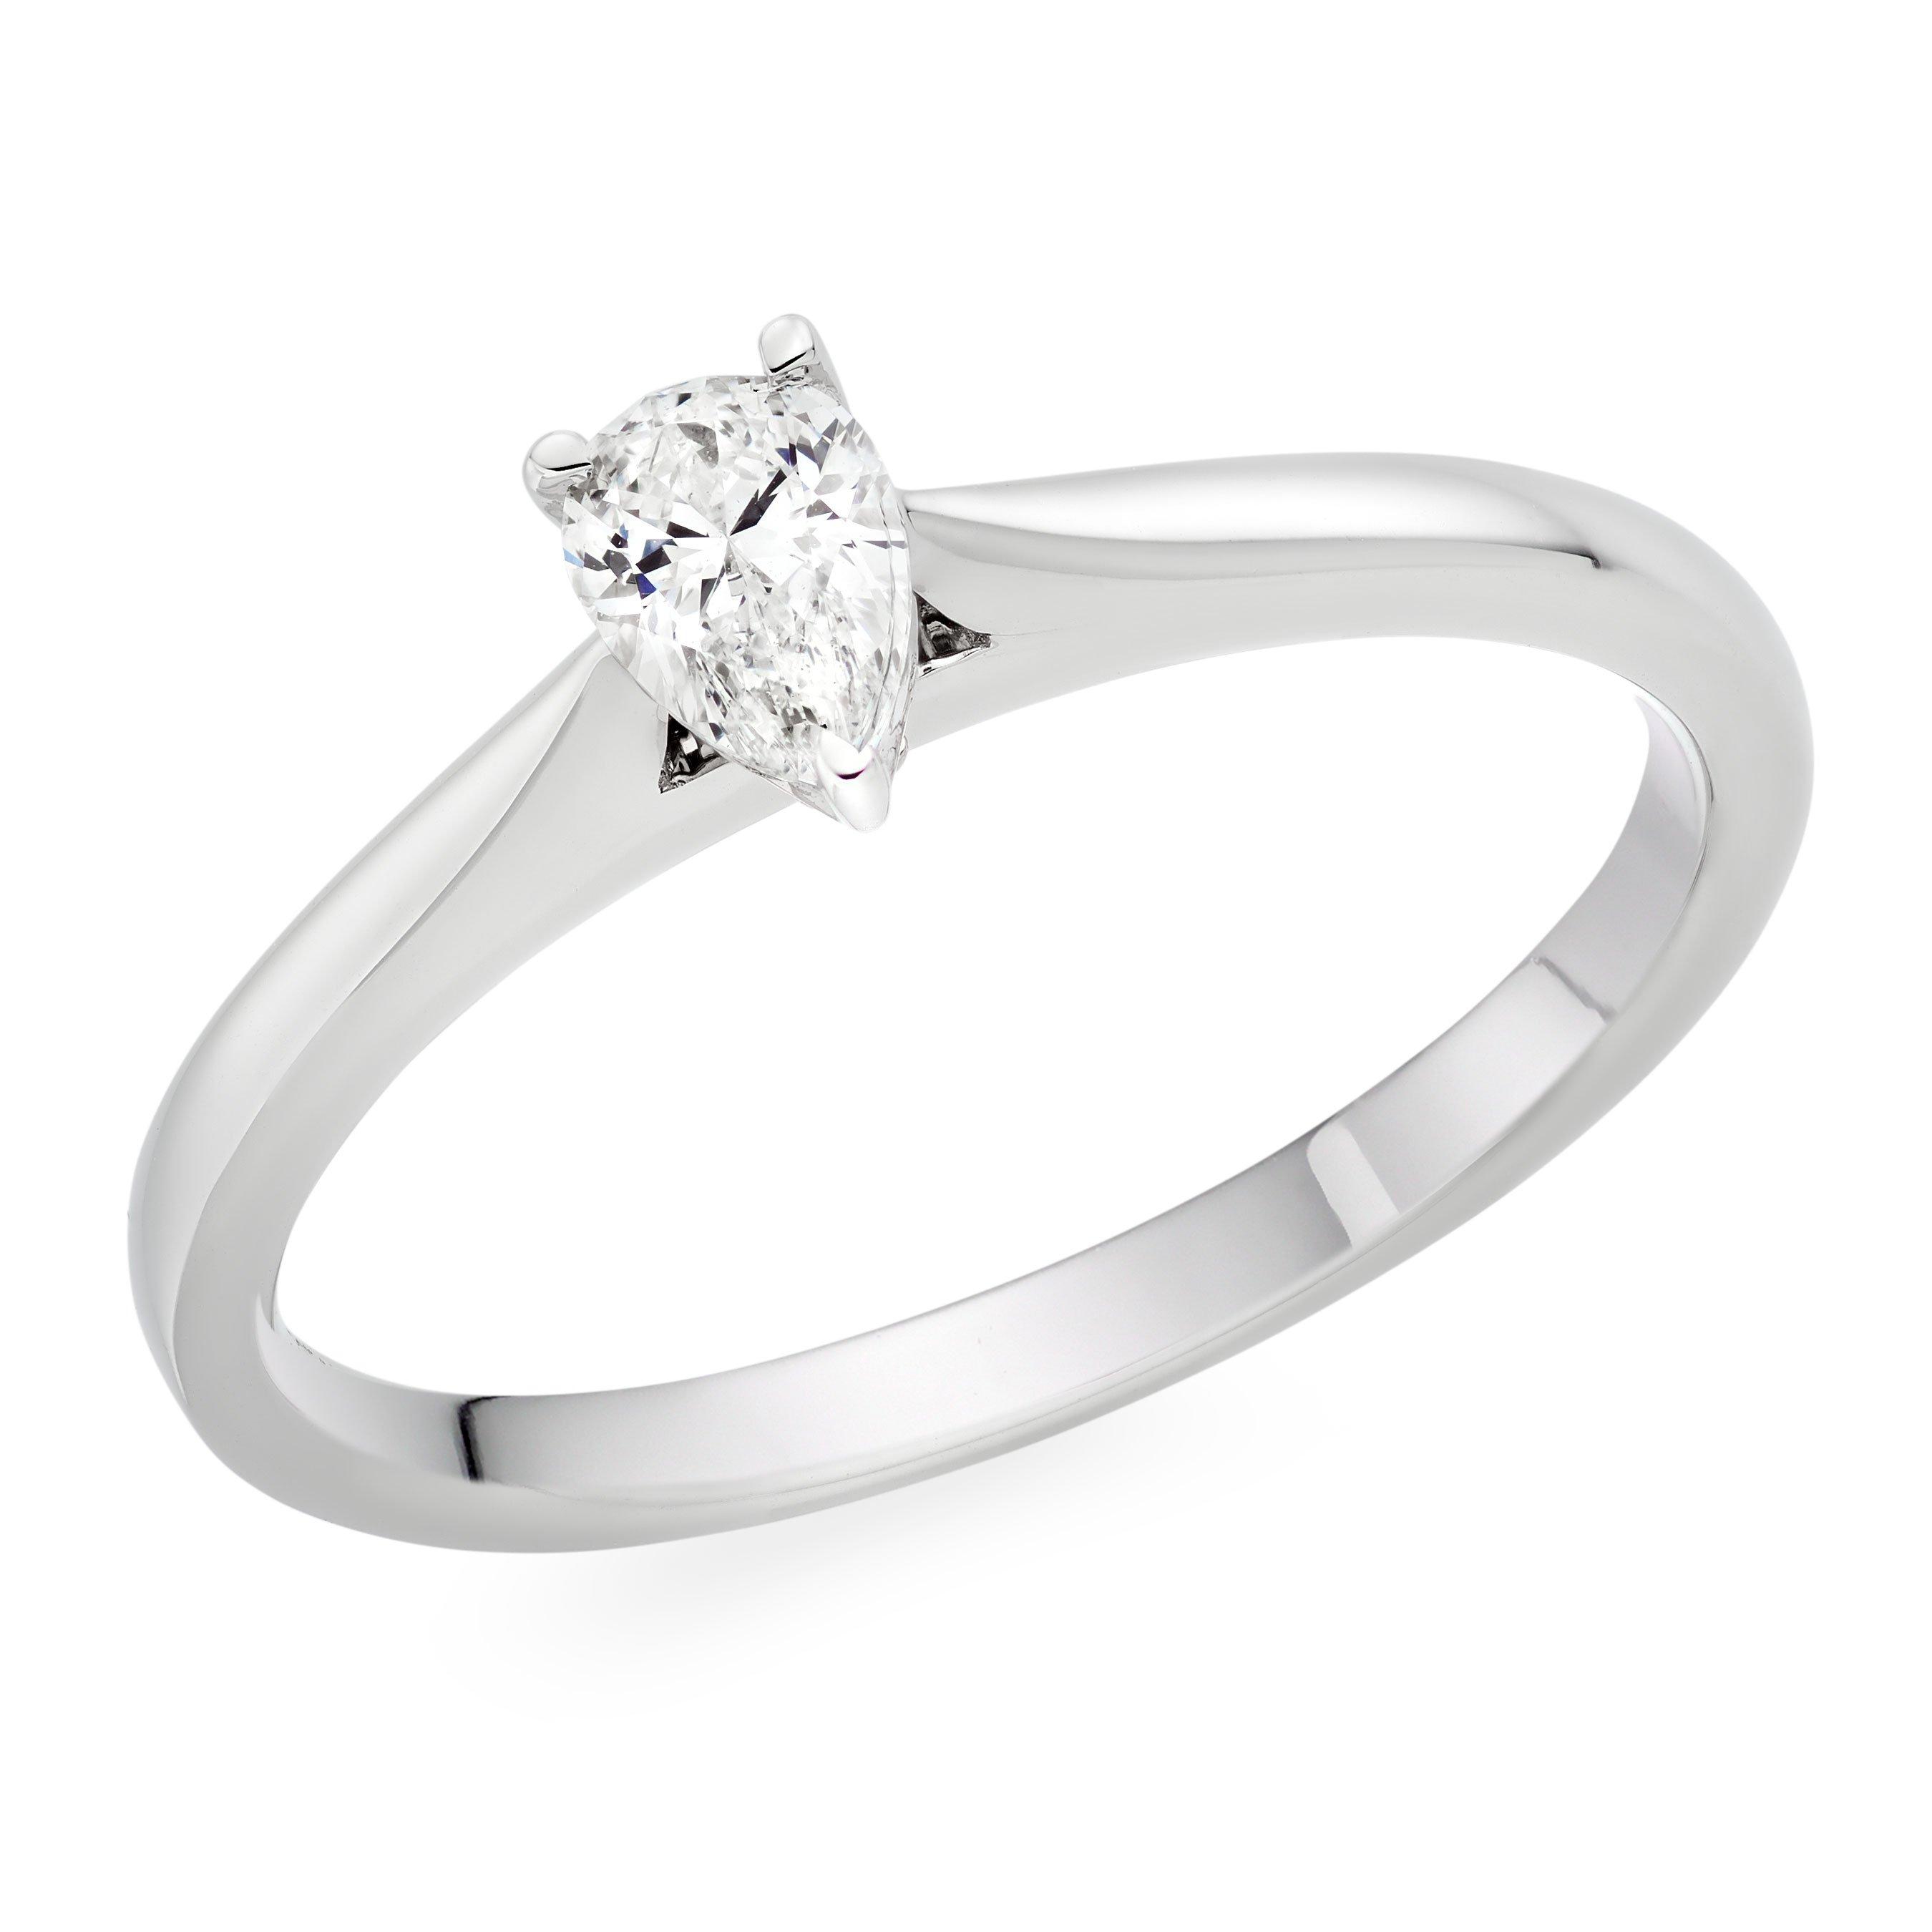 18ct White Gold Diamond Solitaire Ring | 0000174 | Beaverbrooks the ...